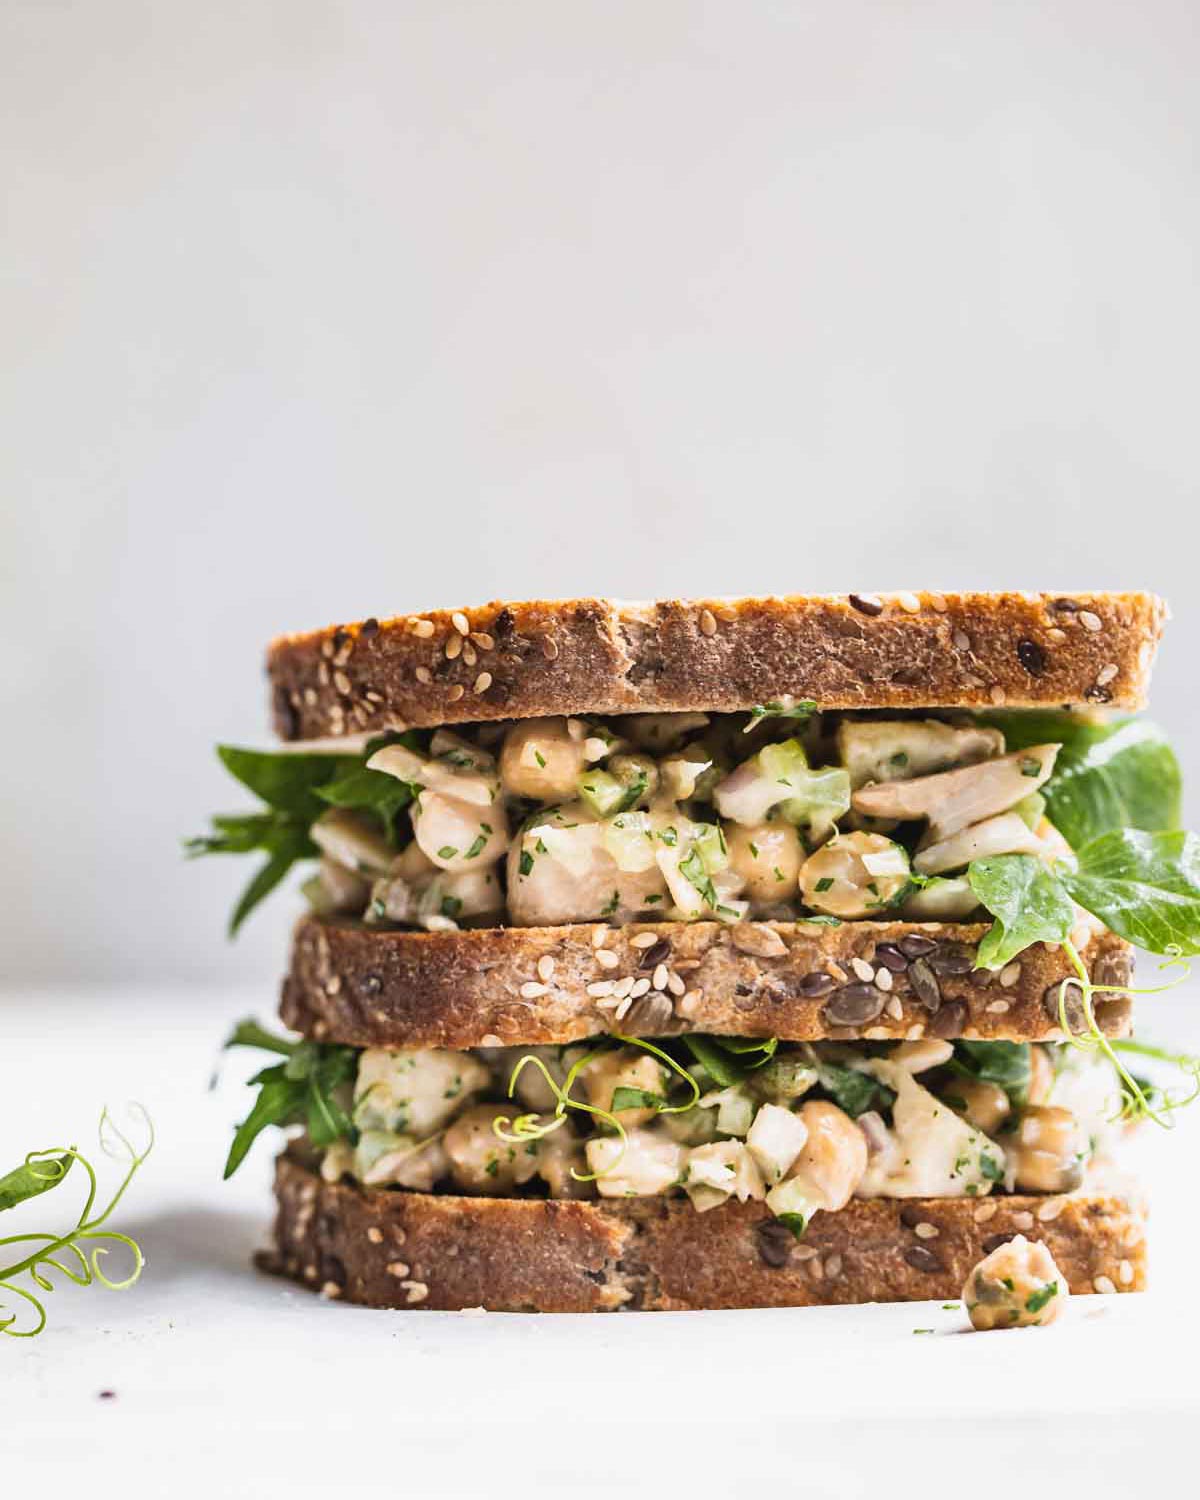 A stacked sandwich with greens on a white background.